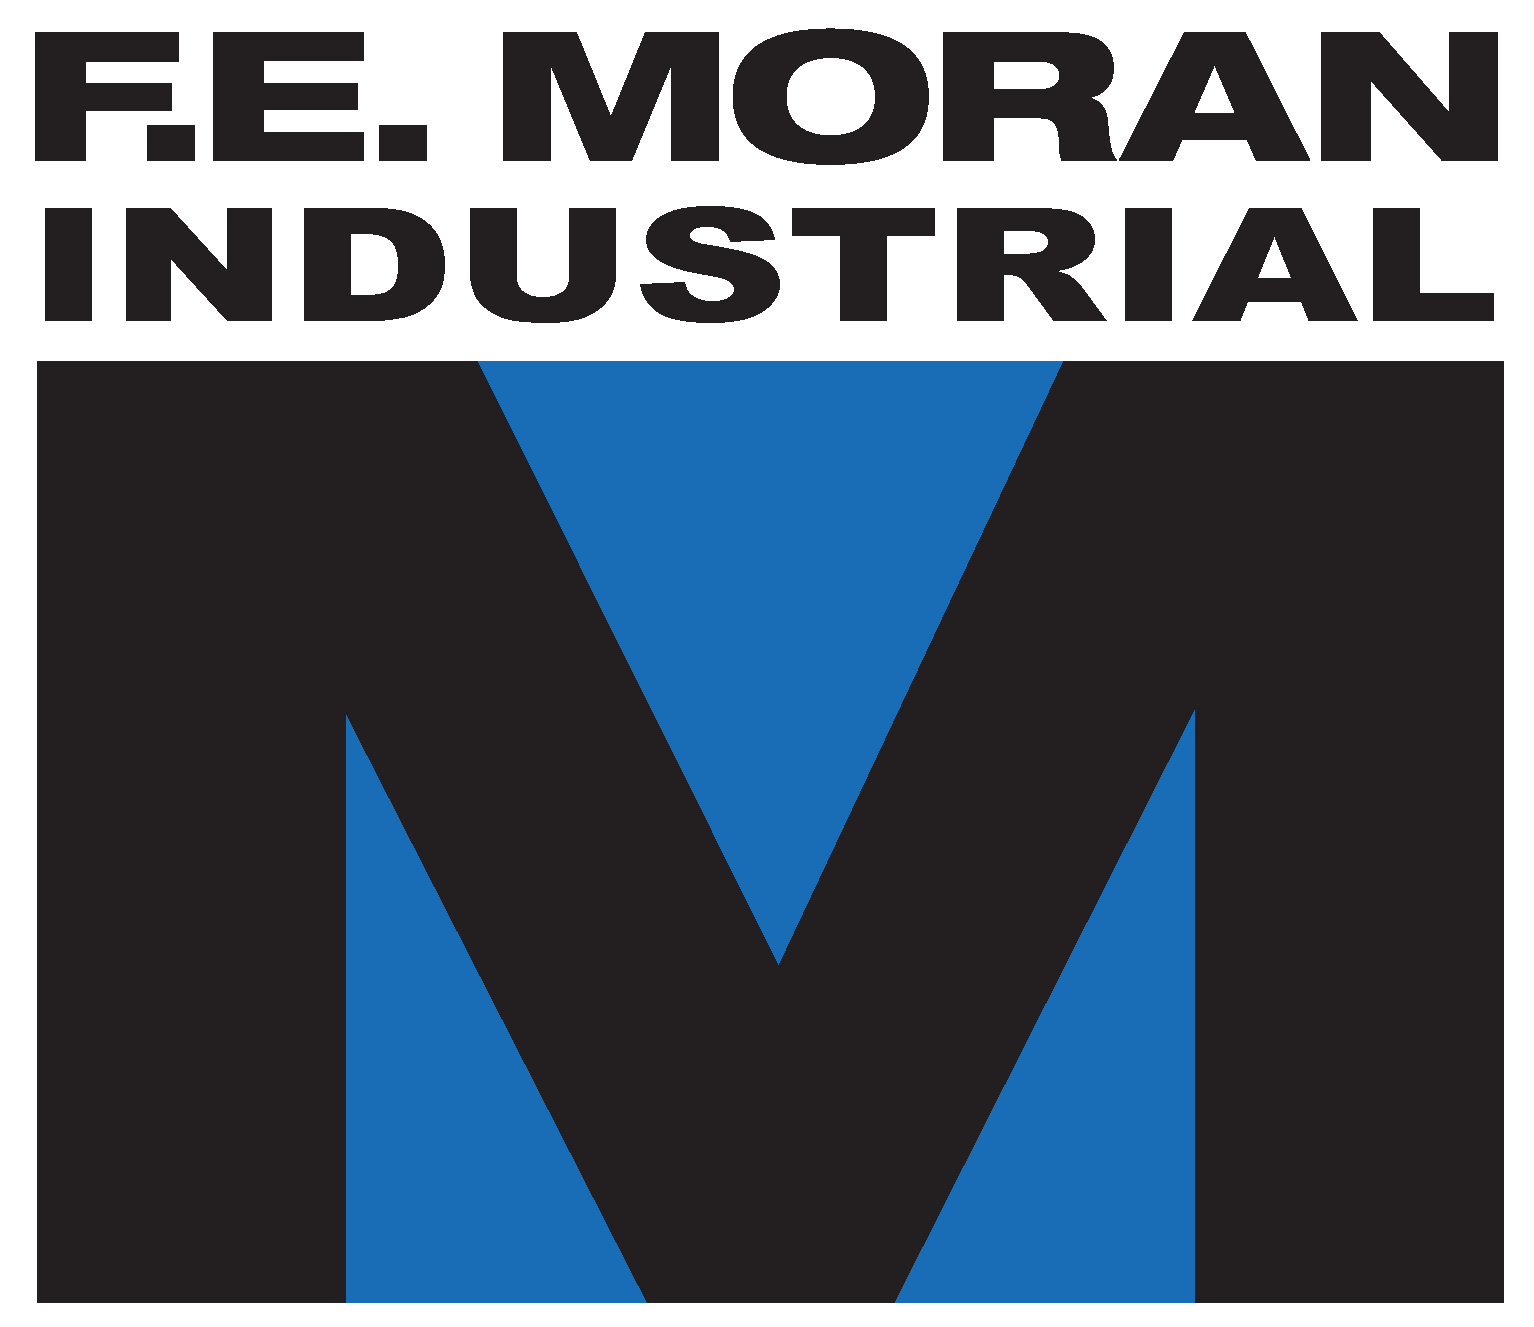 F.E. Moran Mechanical Construction and Piping for Industrial Manufacturing Facilities